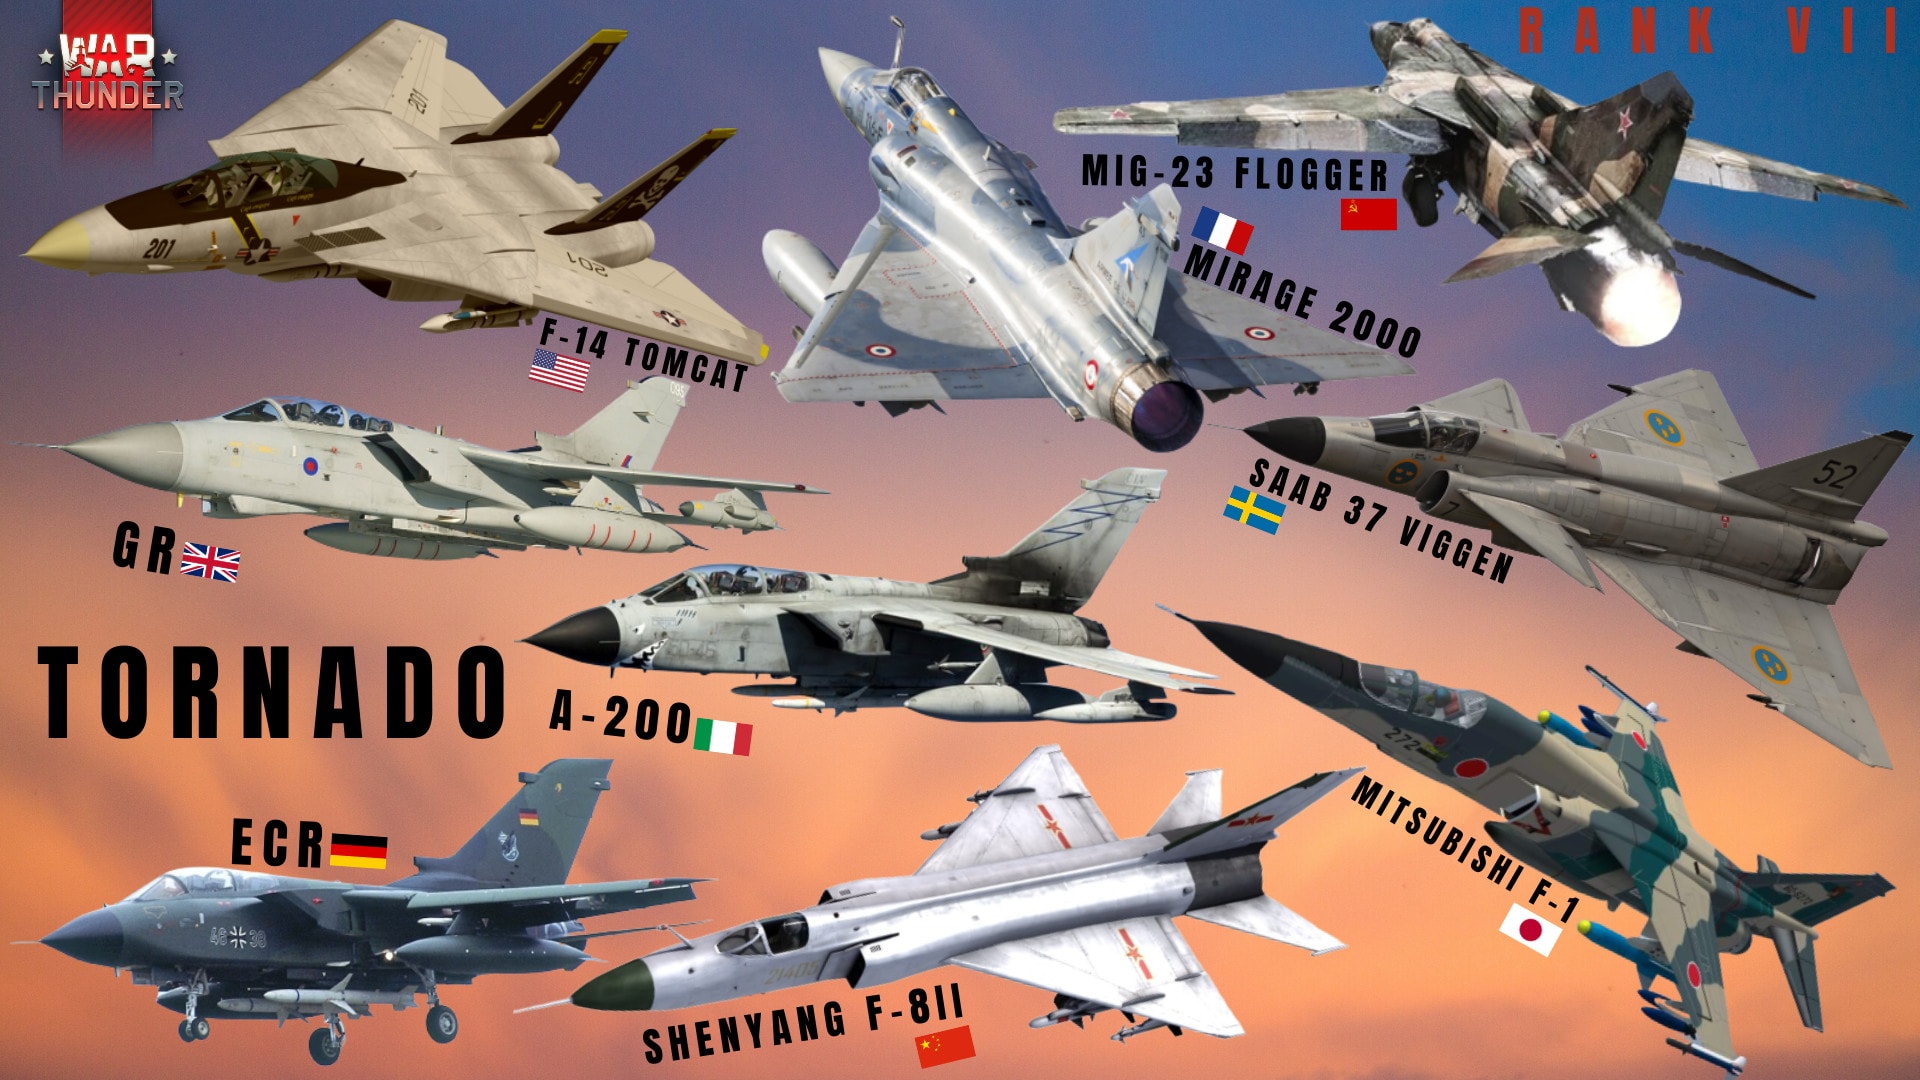 World's most advance, 4th Generation modern standard fighter jets in combat  - Part 01